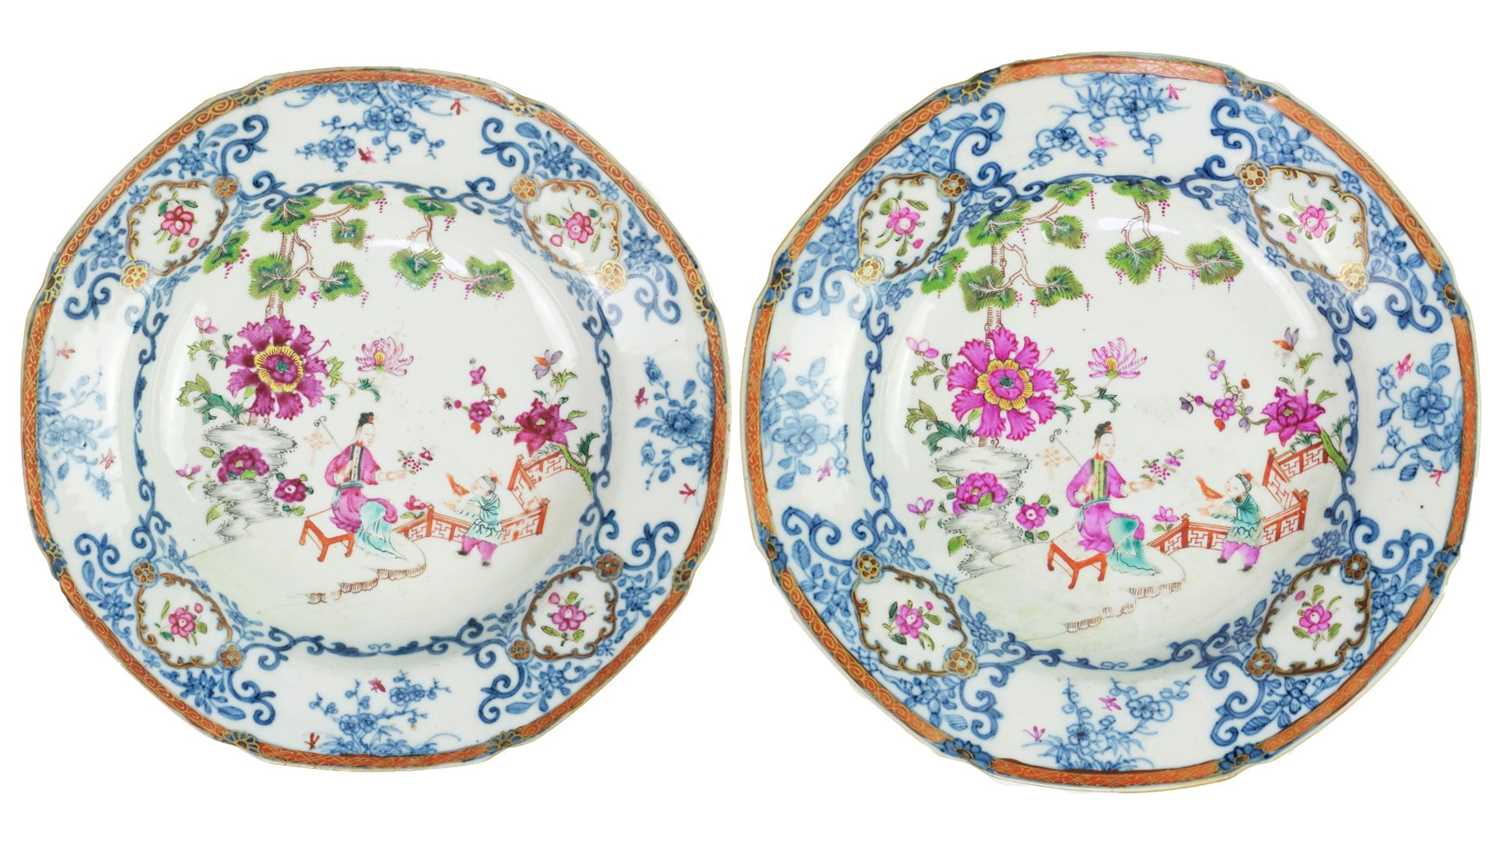 A pair of Chinese famille rose porcelain bowls, Qianlong period, 18th century.